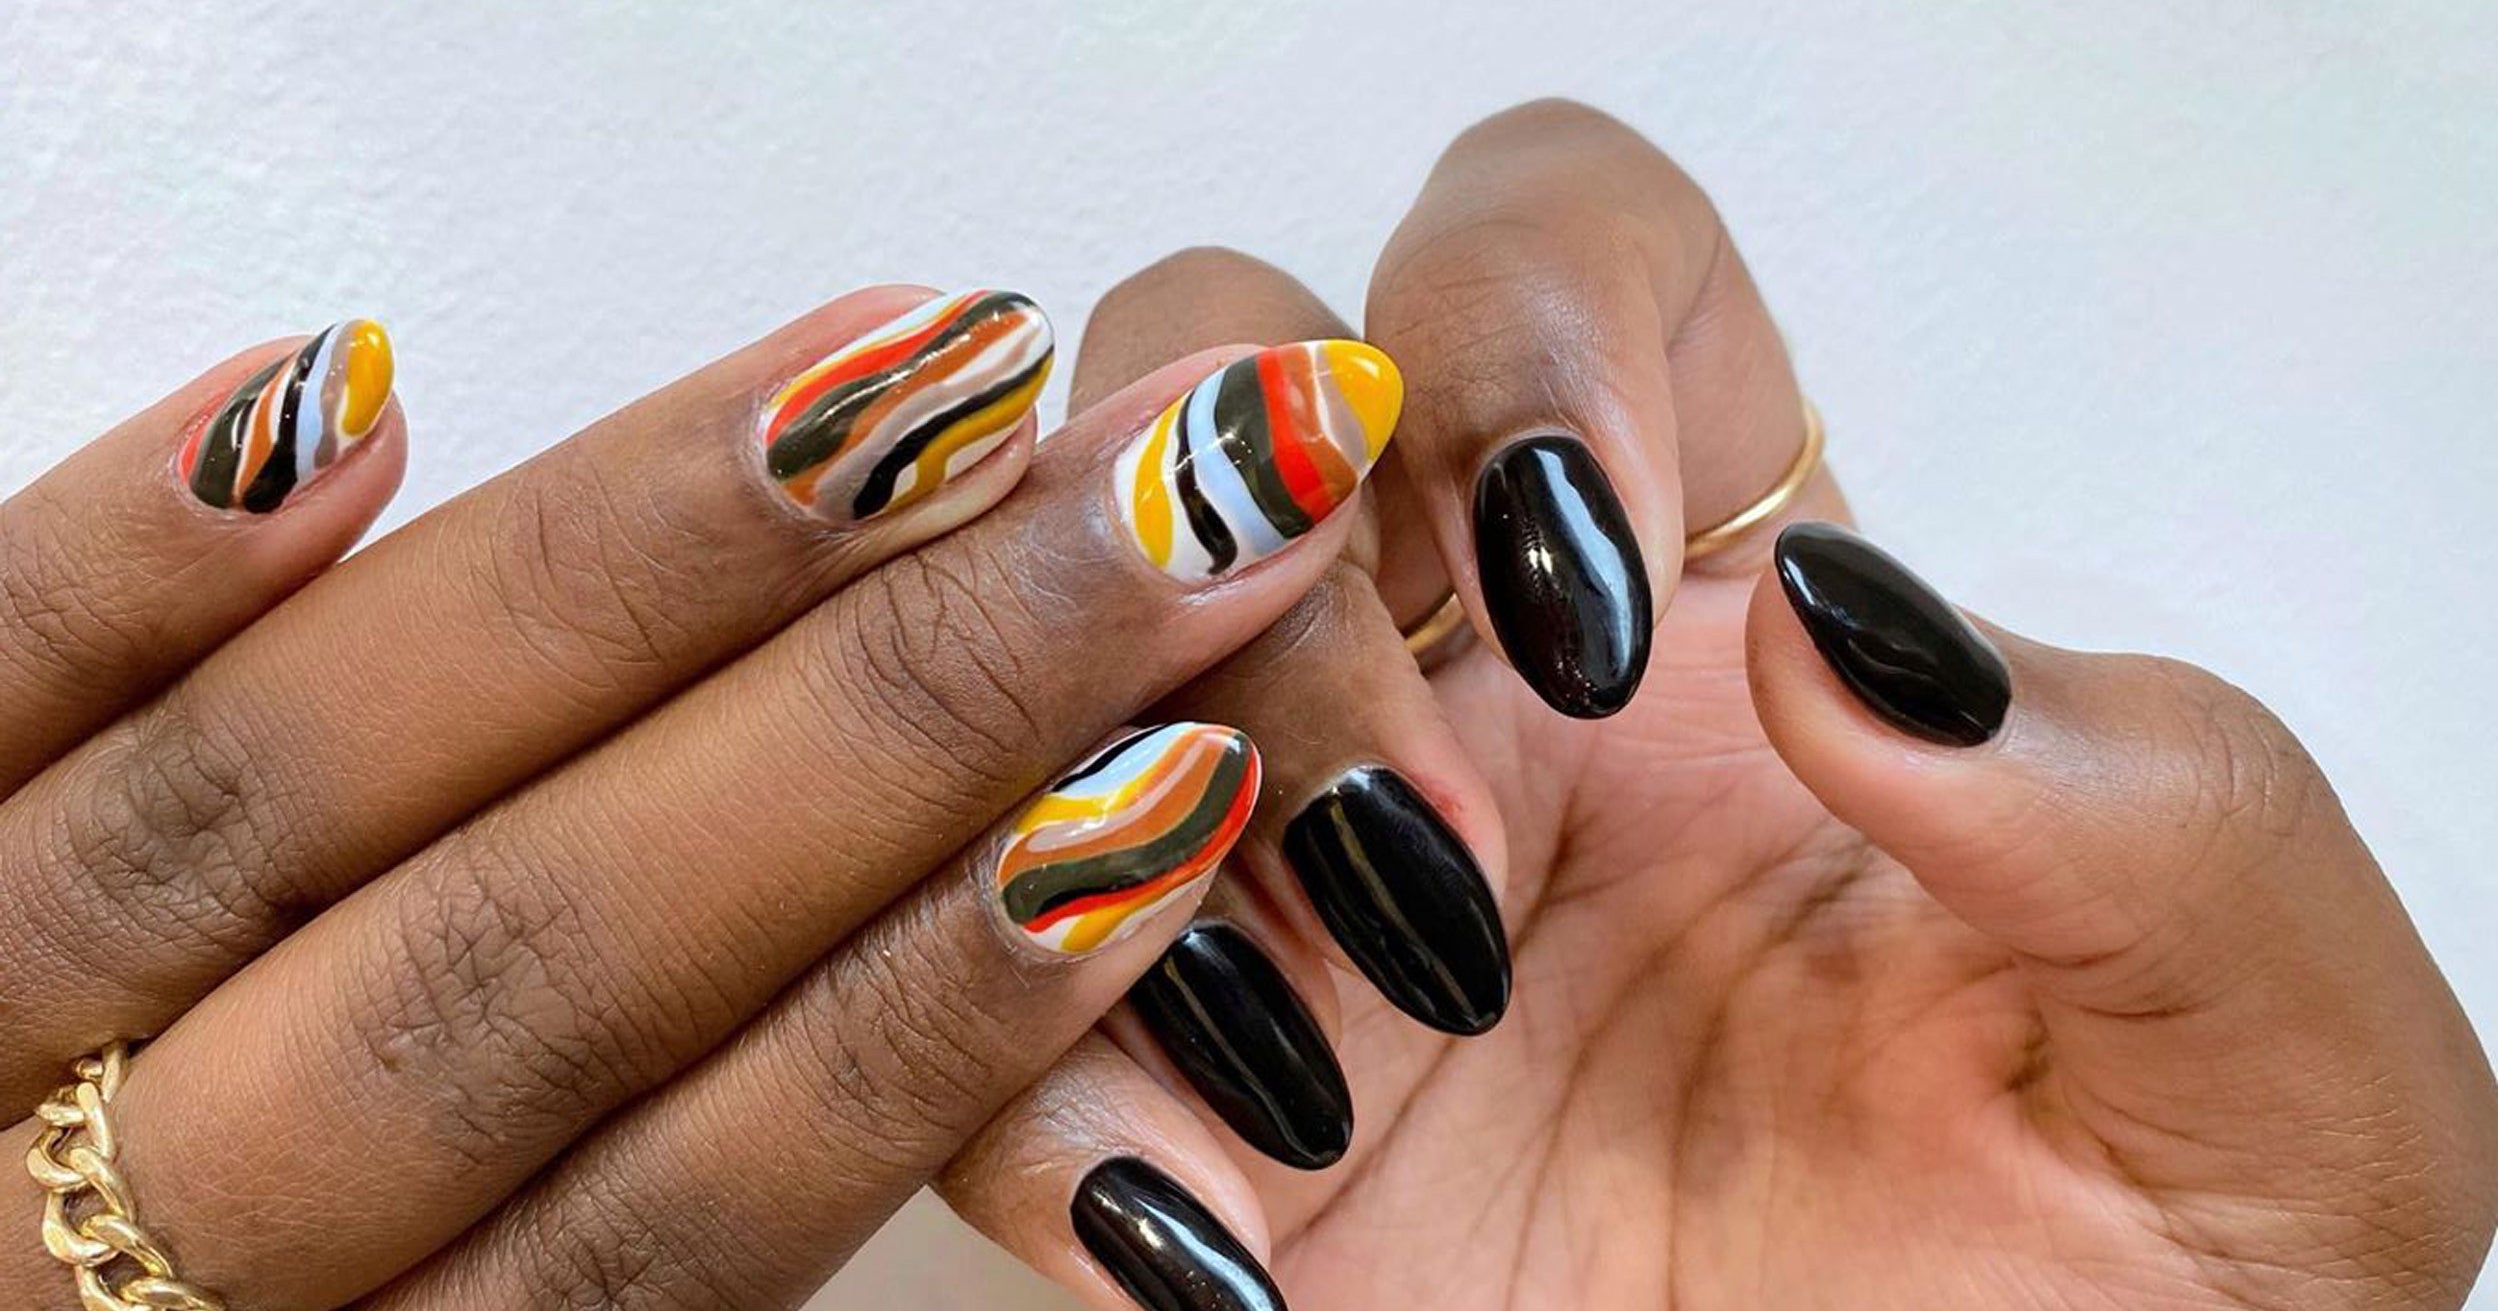 2. "Top 10 Summer Nail Trends for 2021" - wide 2